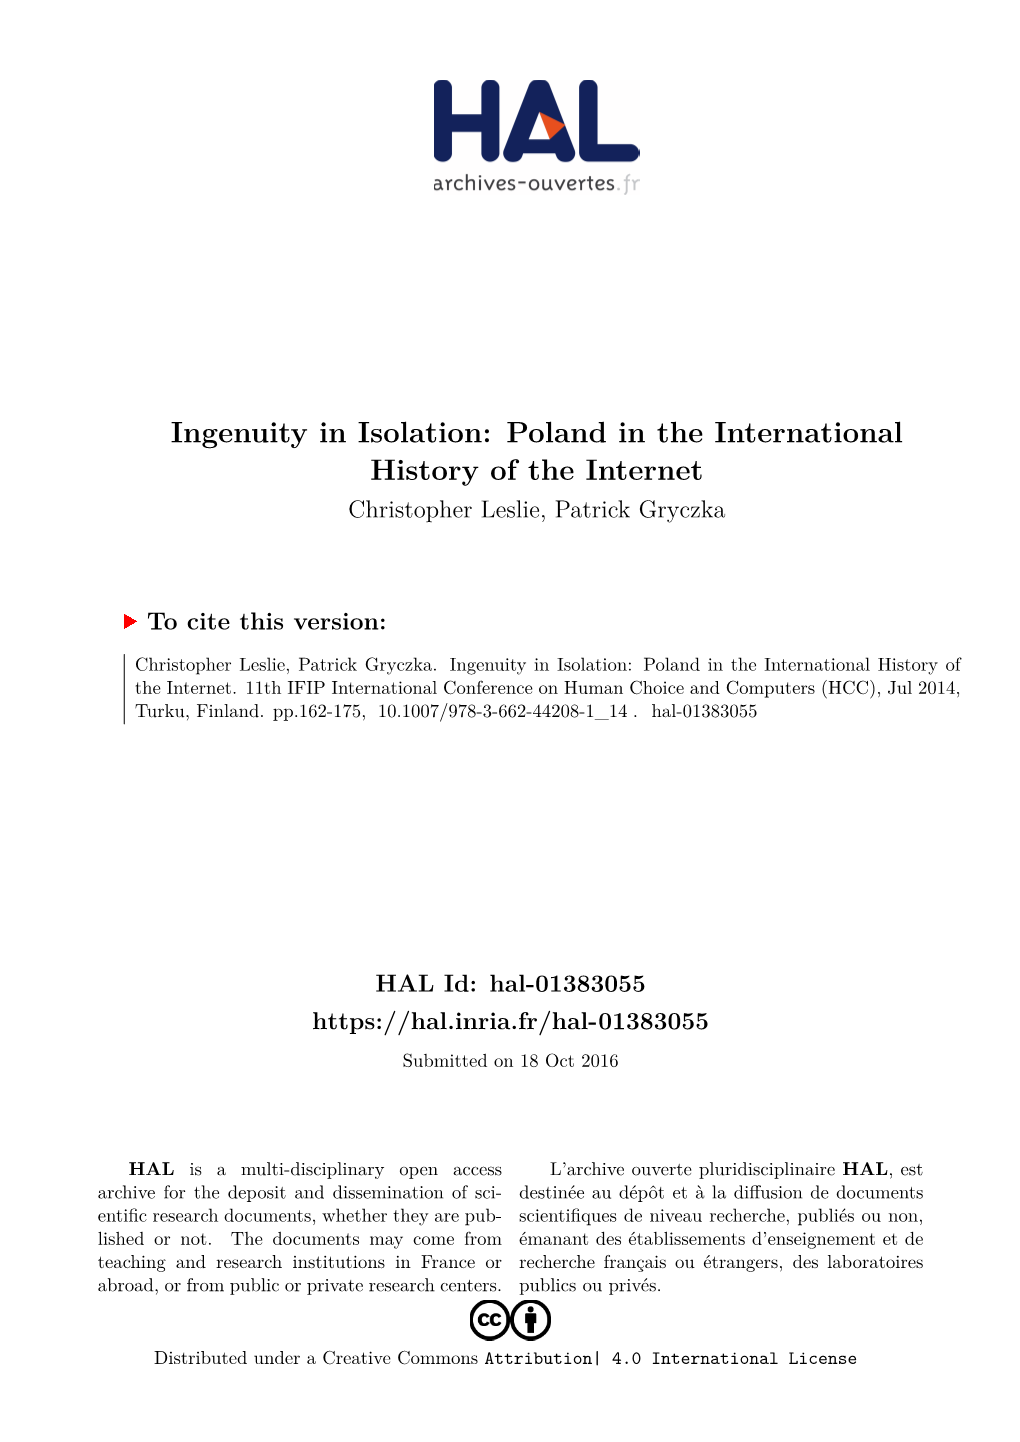 Ingenuity in Isolation: Poland in the International History of the Internet Christopher Leslie, Patrick Gryczka